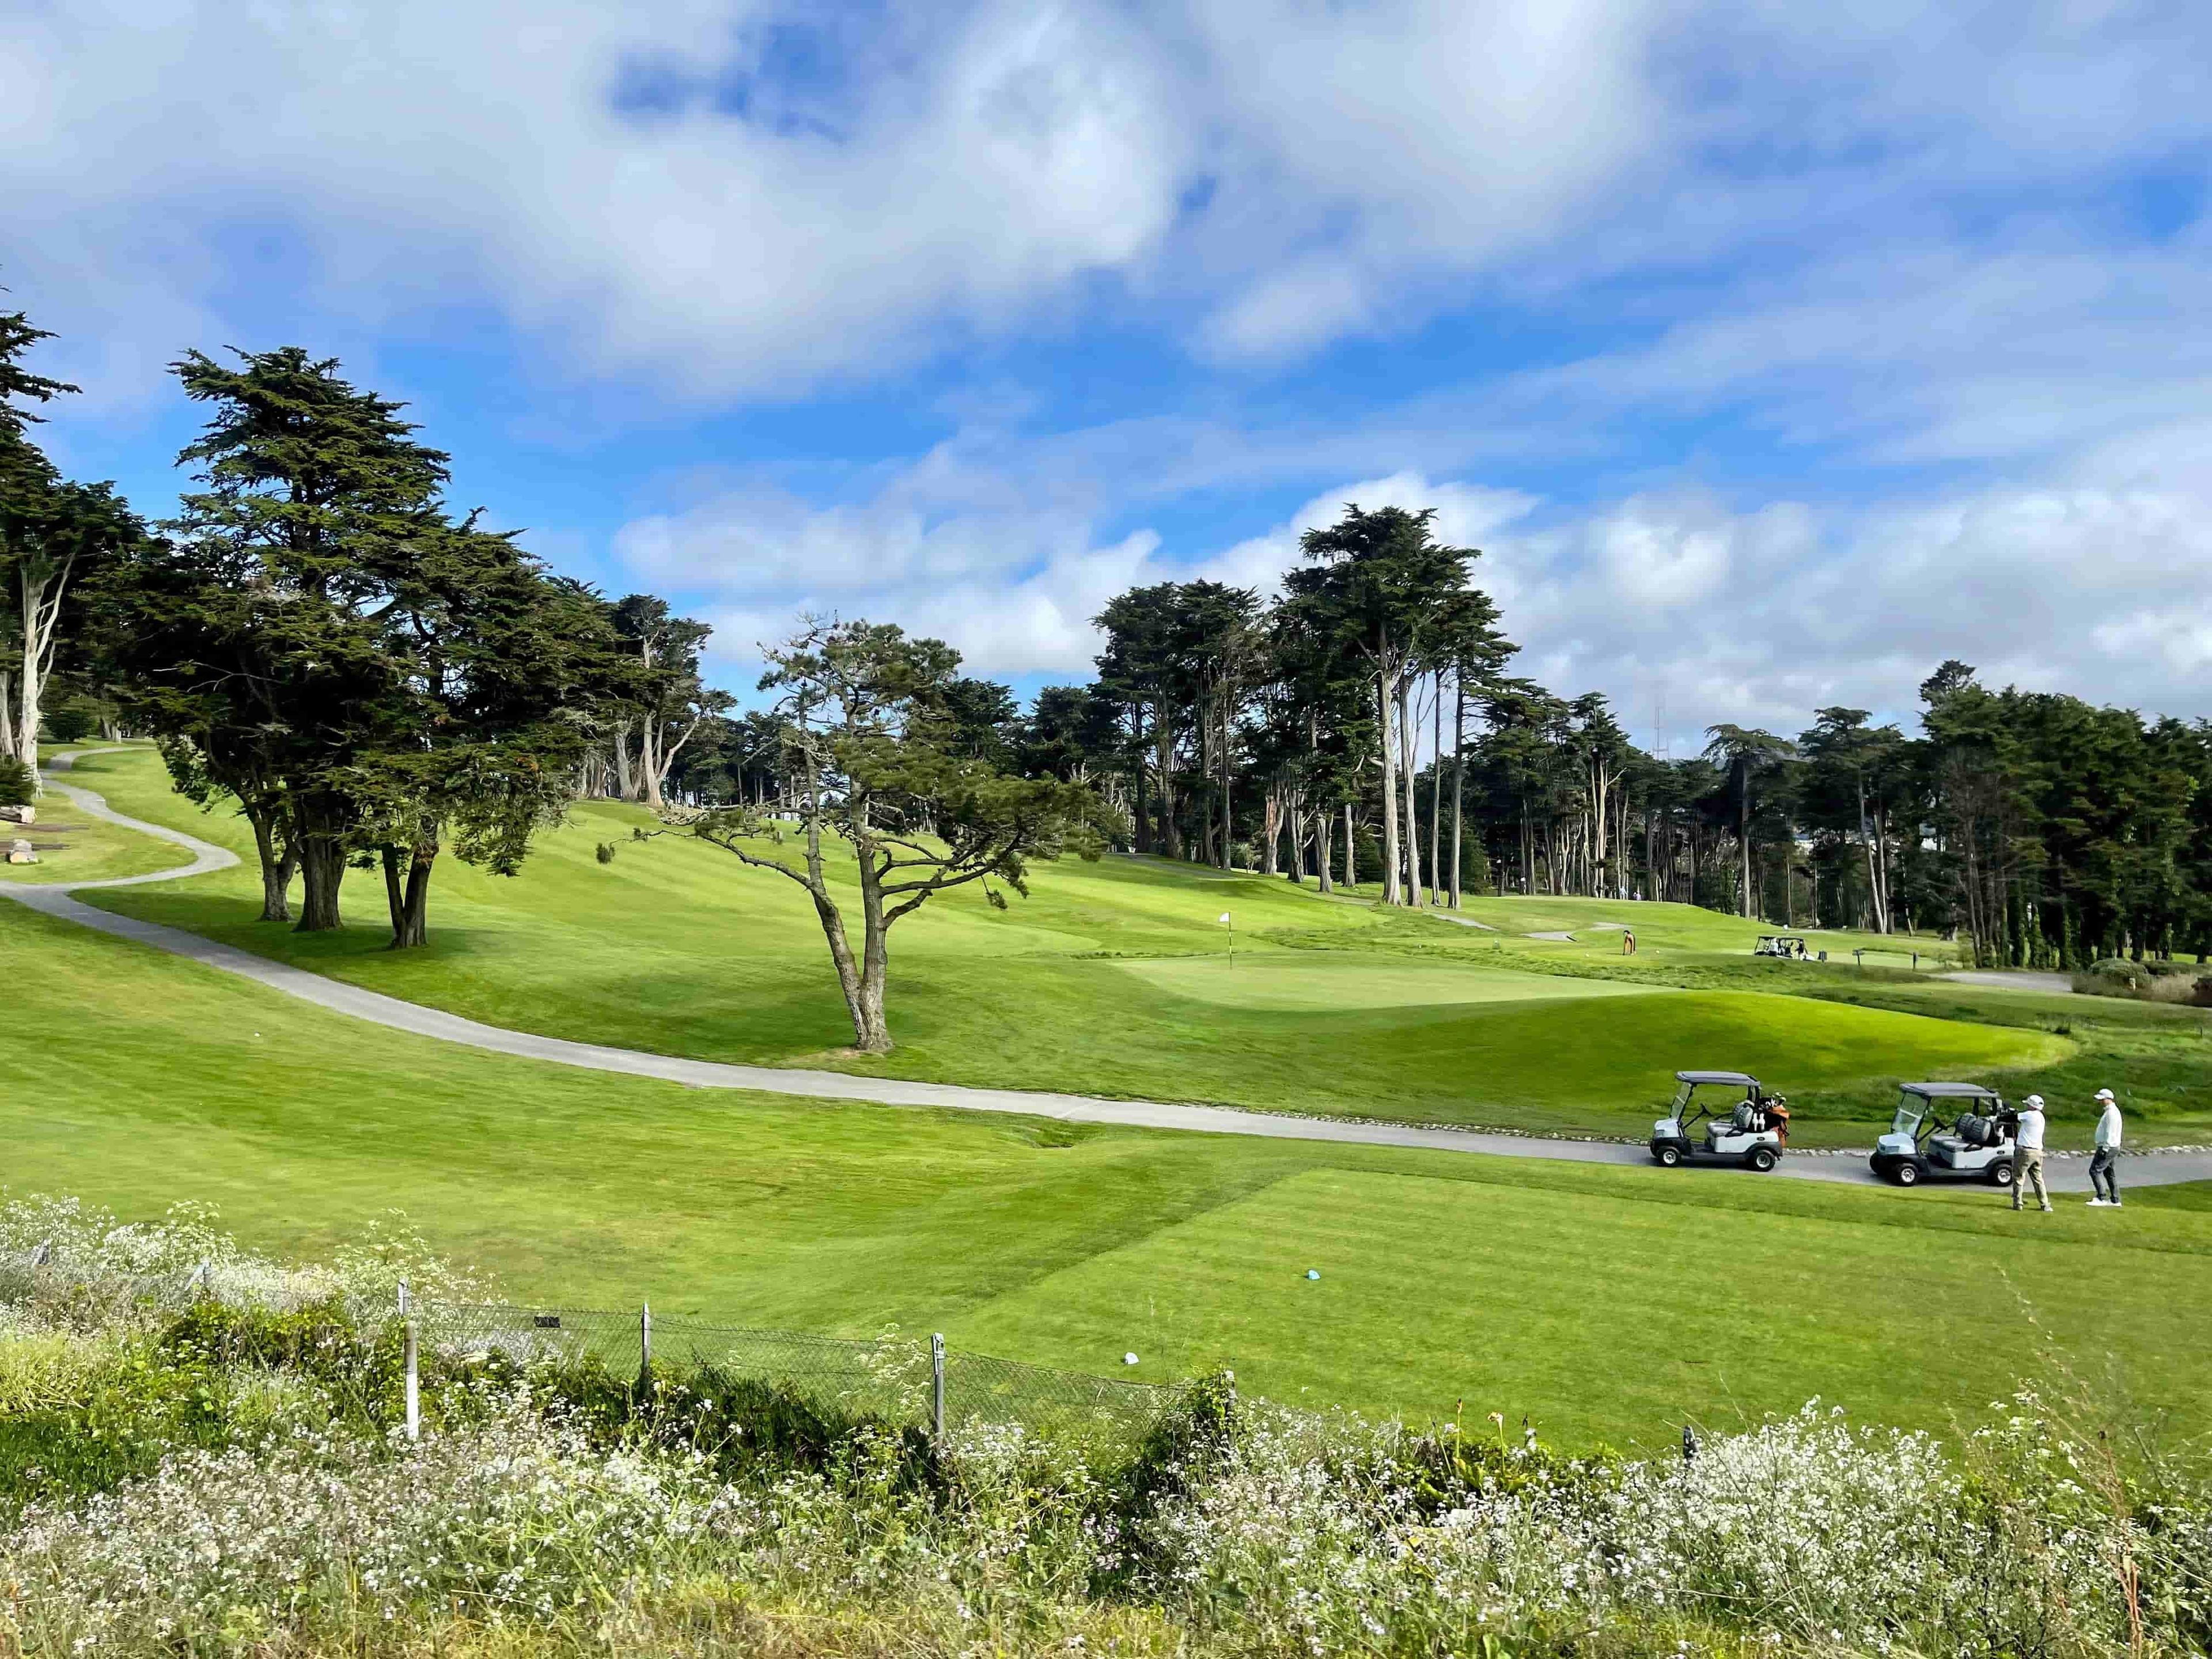 Sunny day with green grass and blue skies at Presidio Golf Course.